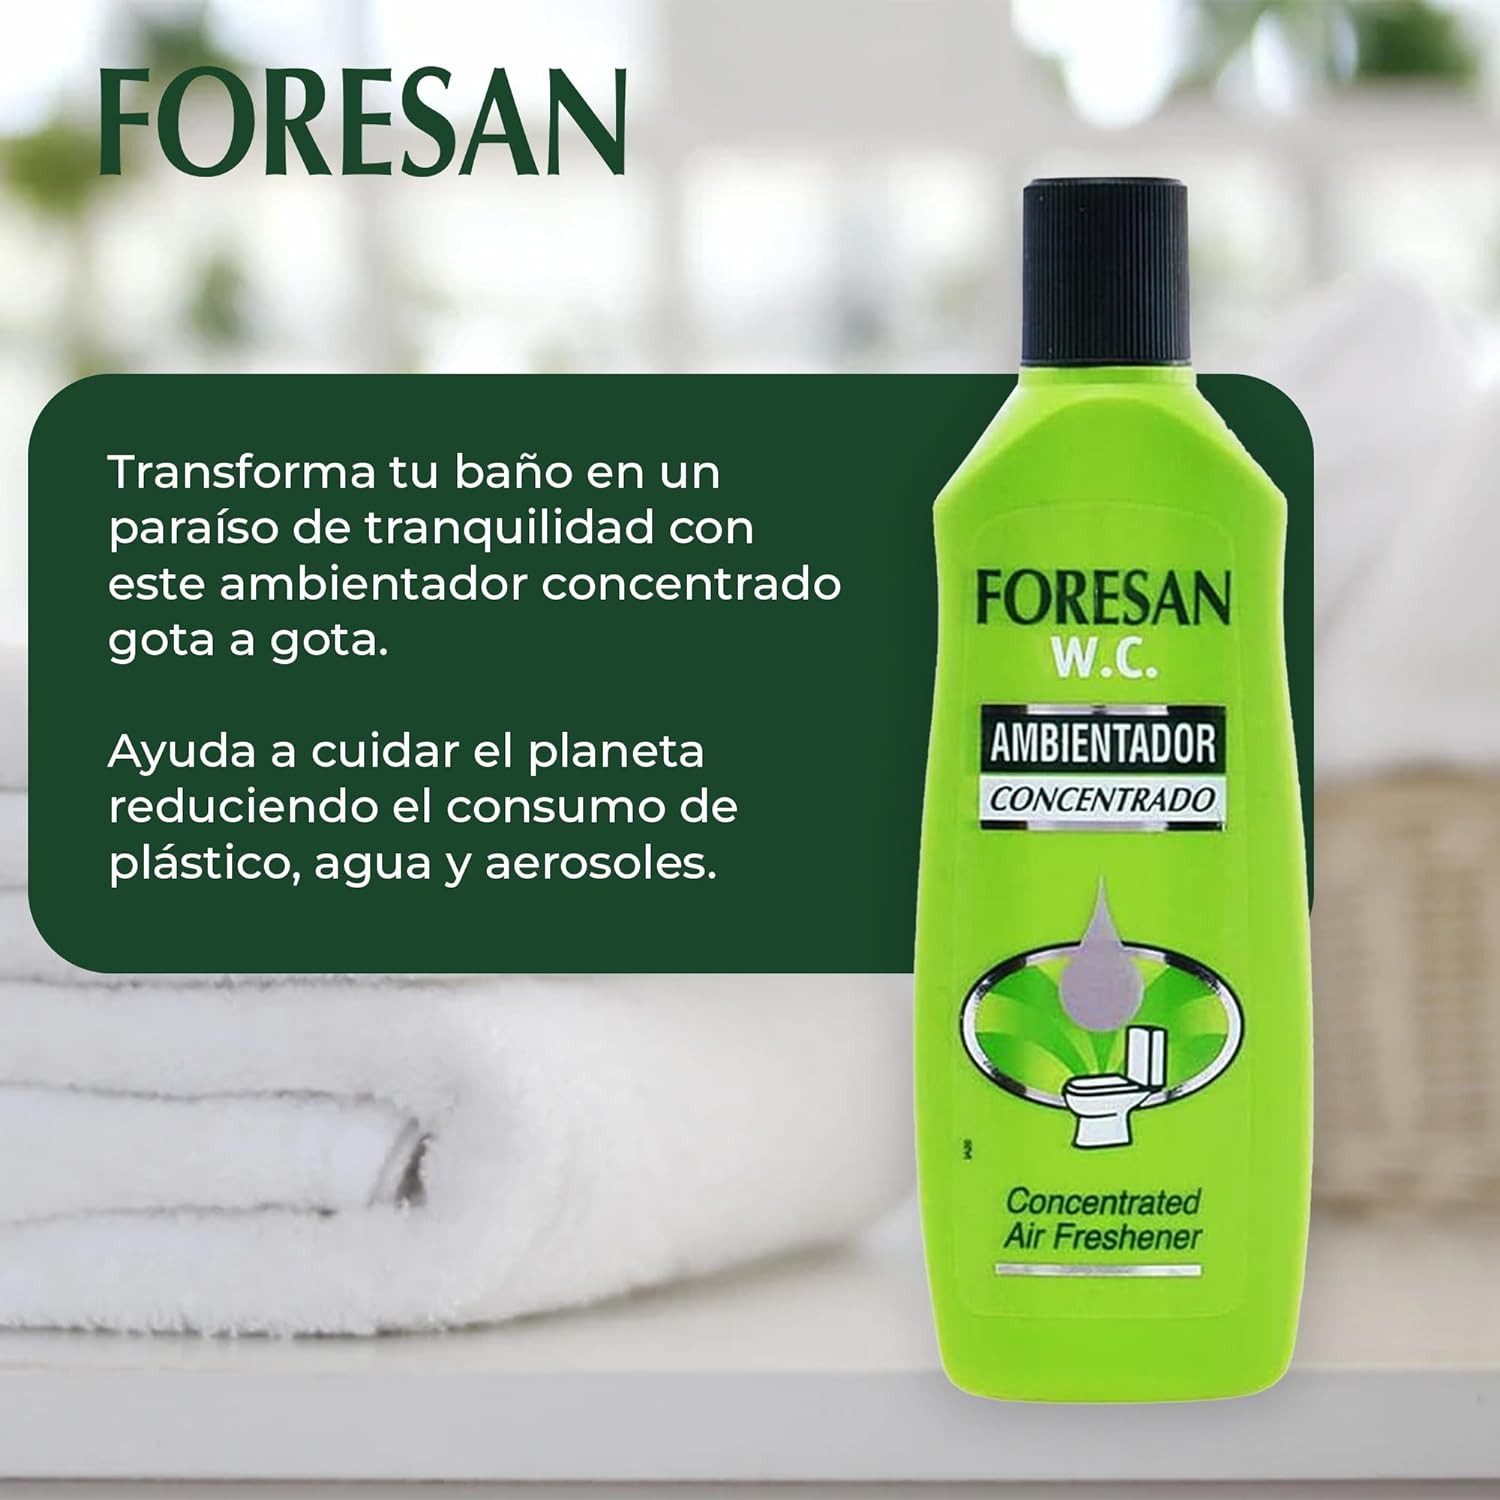 Foresan Concentrated Air Freshner 125ml W.C